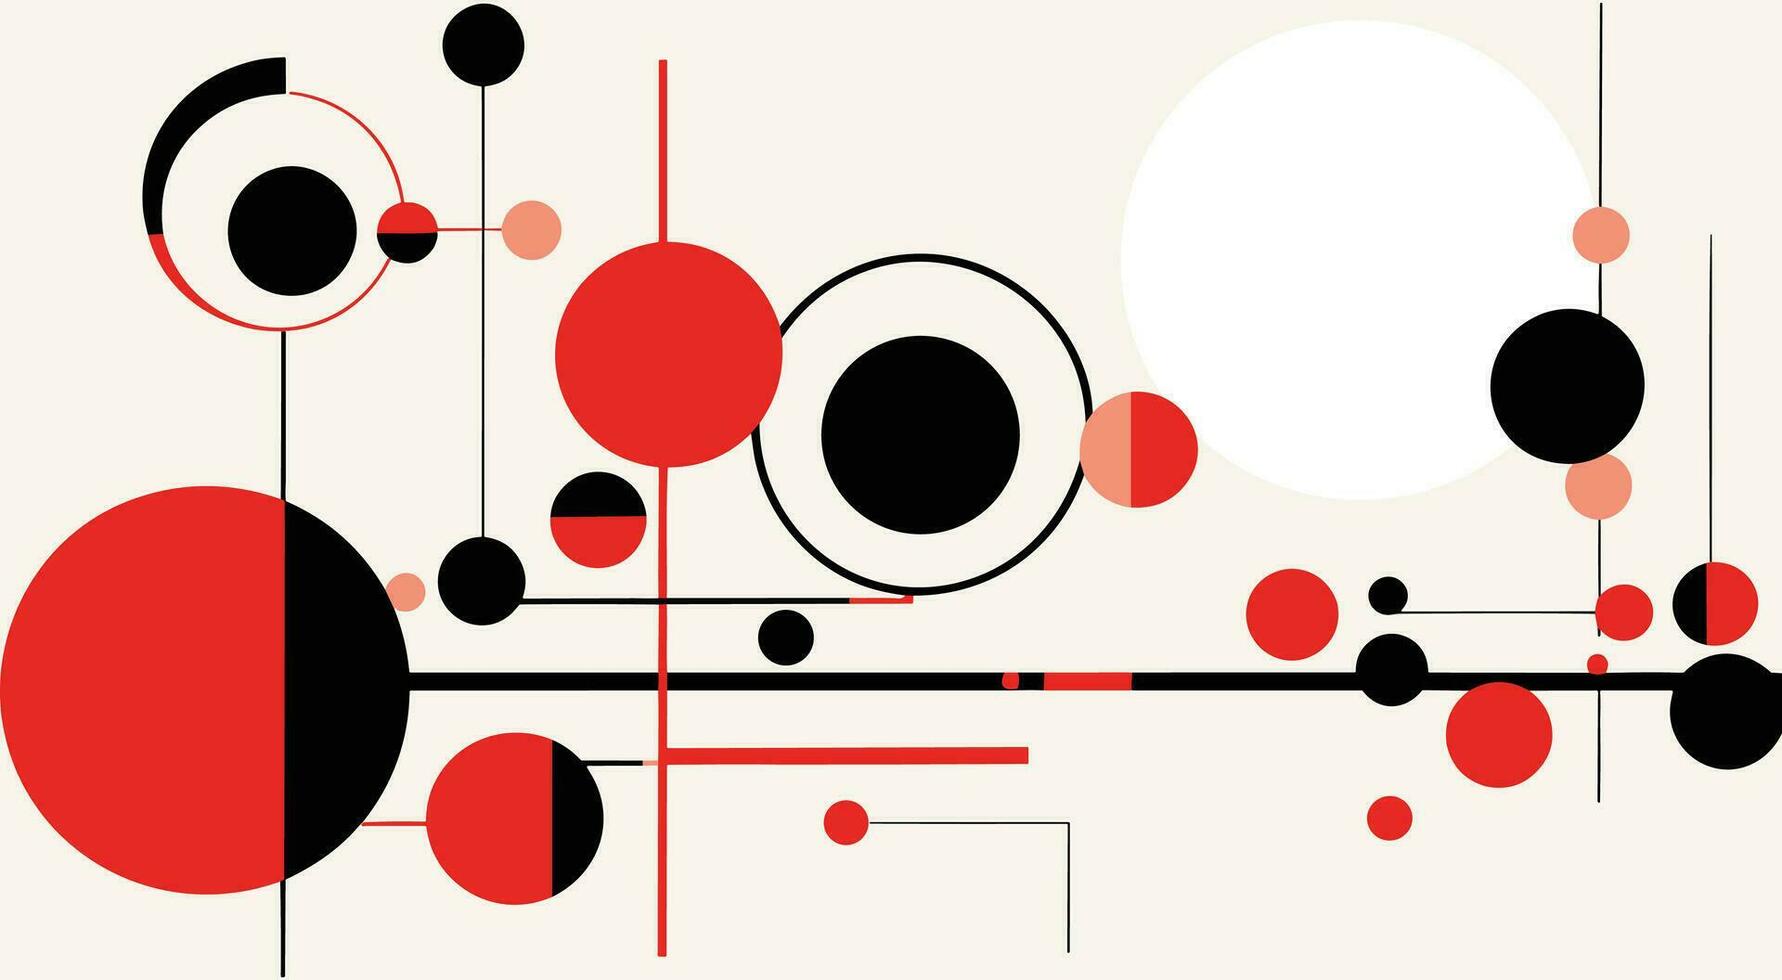 abstract circles of circle pattern graphic design flat design, in the style of de stijl, precisionist lines and shapes, red and black, mechanical designs, analytical art, scientific diagrams vector